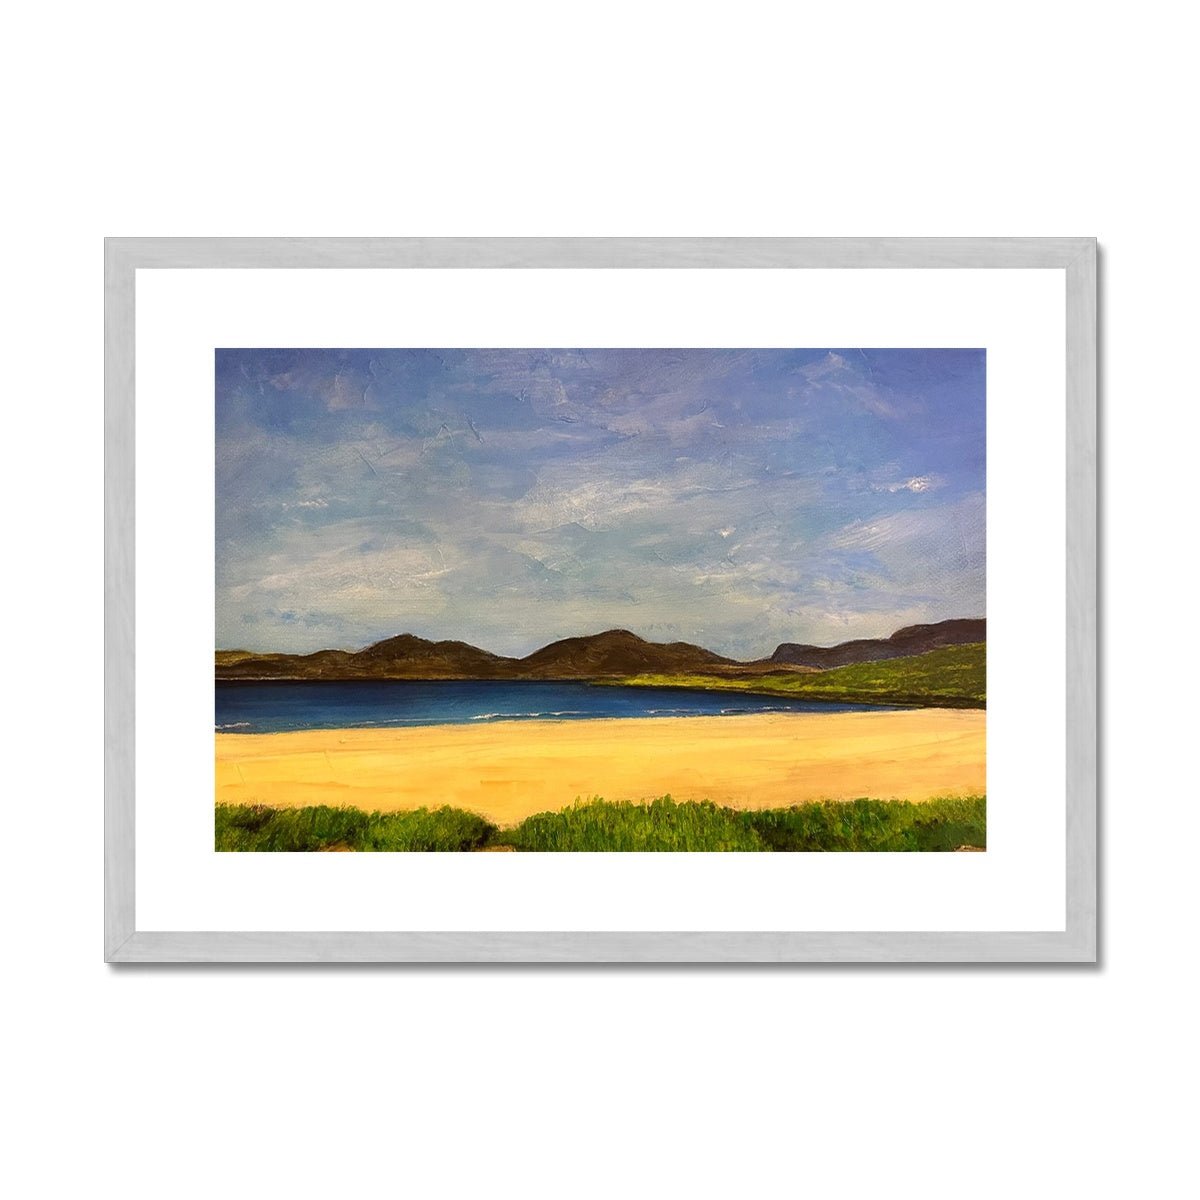 Luskentyre Beach Harris Painting | Antique Framed & Mounted Prints From Scotland-Antique Framed & Mounted Prints-Hebridean Islands Art Gallery-A2 Landscape-Silver Frame-Paintings, Prints, Homeware, Art Gifts From Scotland By Scottish Artist Kevin Hunter